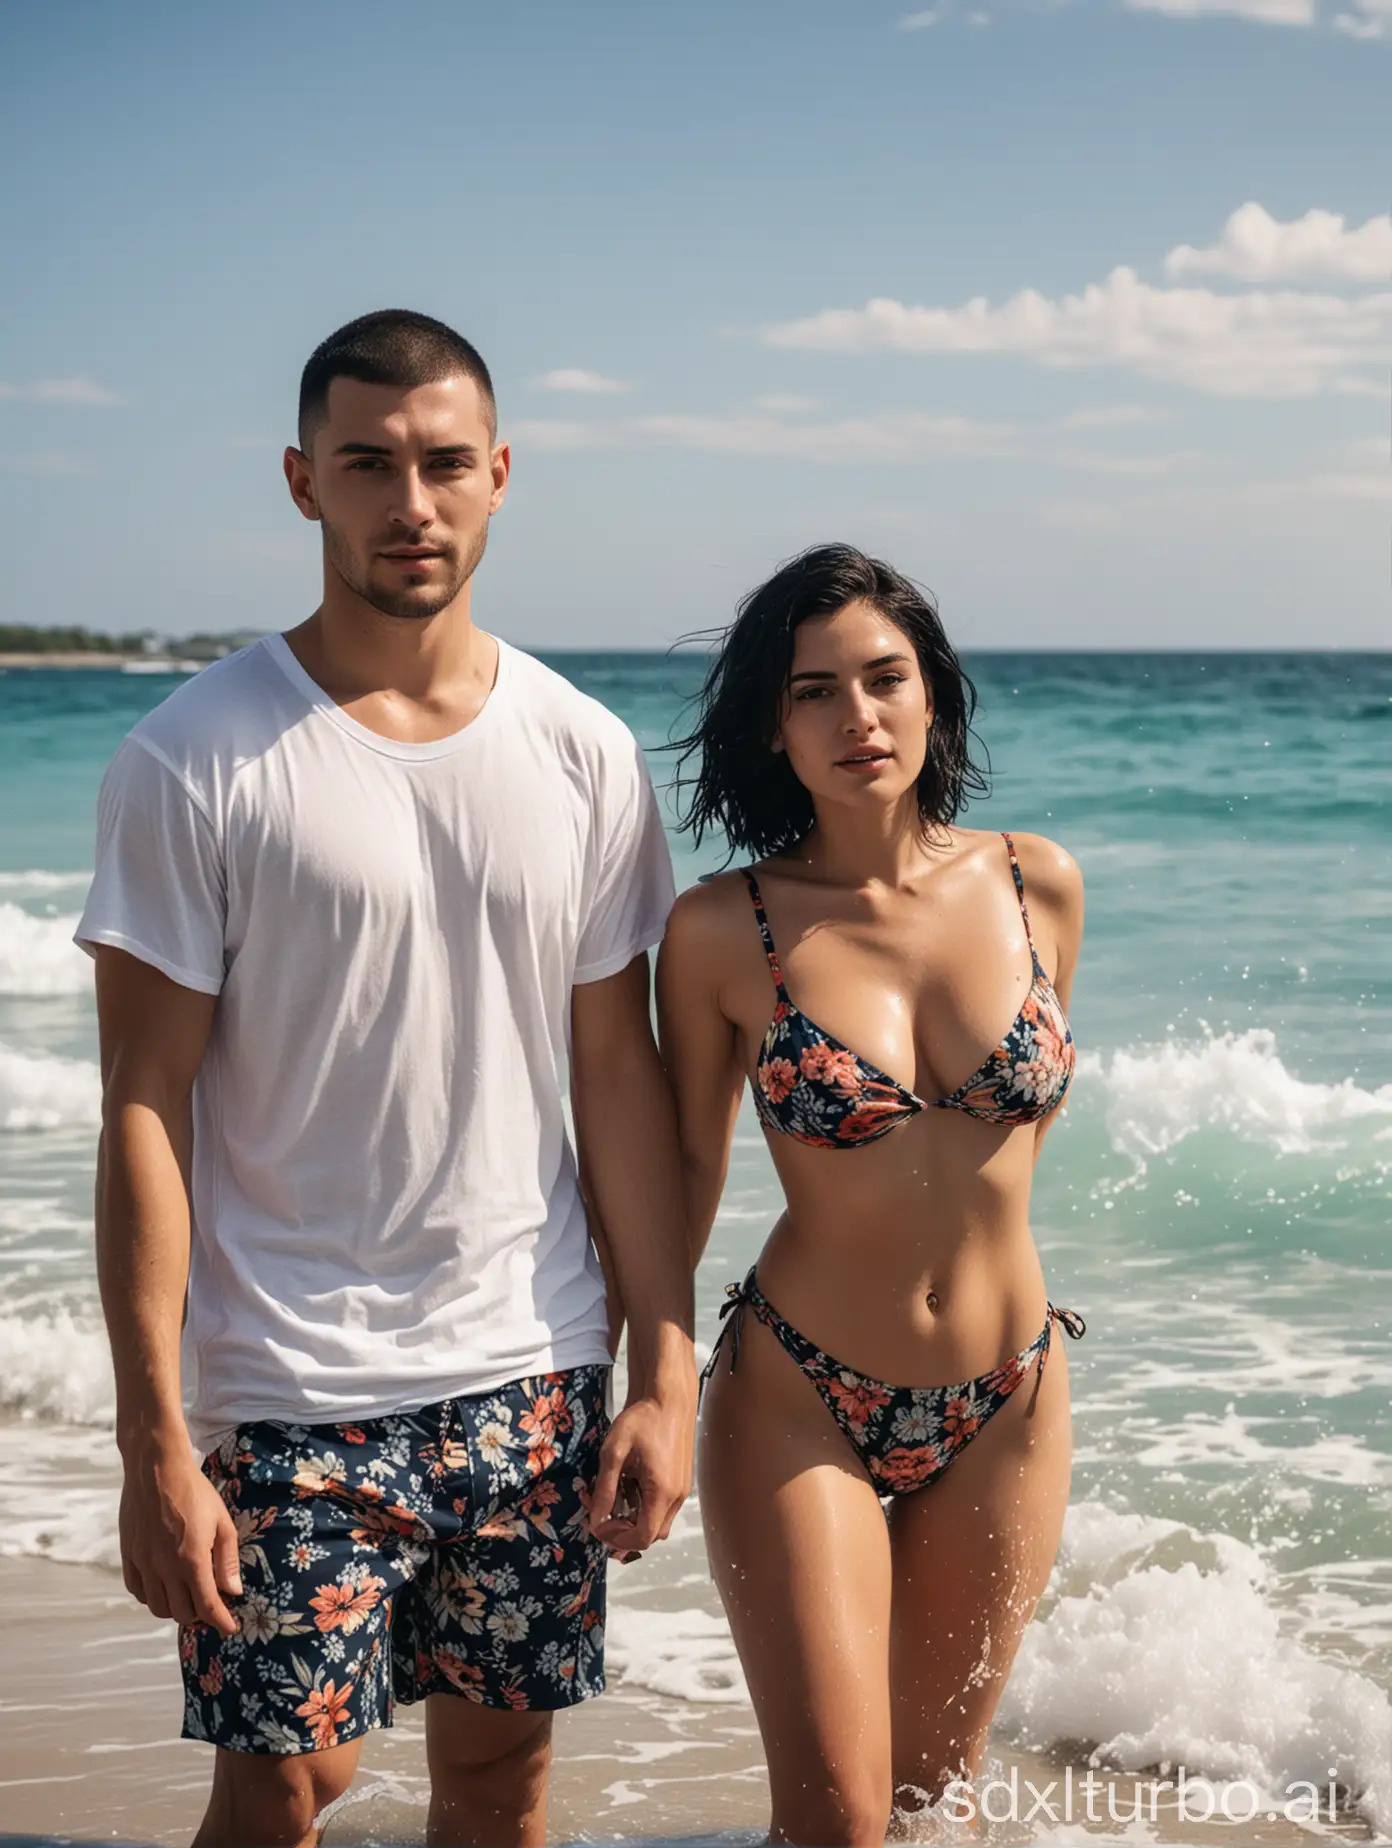 a young man and woman, the man with short black hair and a buzz cut, the man wearing a loose white t-shirt, the woman with long black hair, the woman wearing a tight floral bikini, large breasts, beach shorts, looking directly at the camera, on the beach (with splashing water), blue sea water, fair skin, FHD quality (8k), romantic couple, remote island